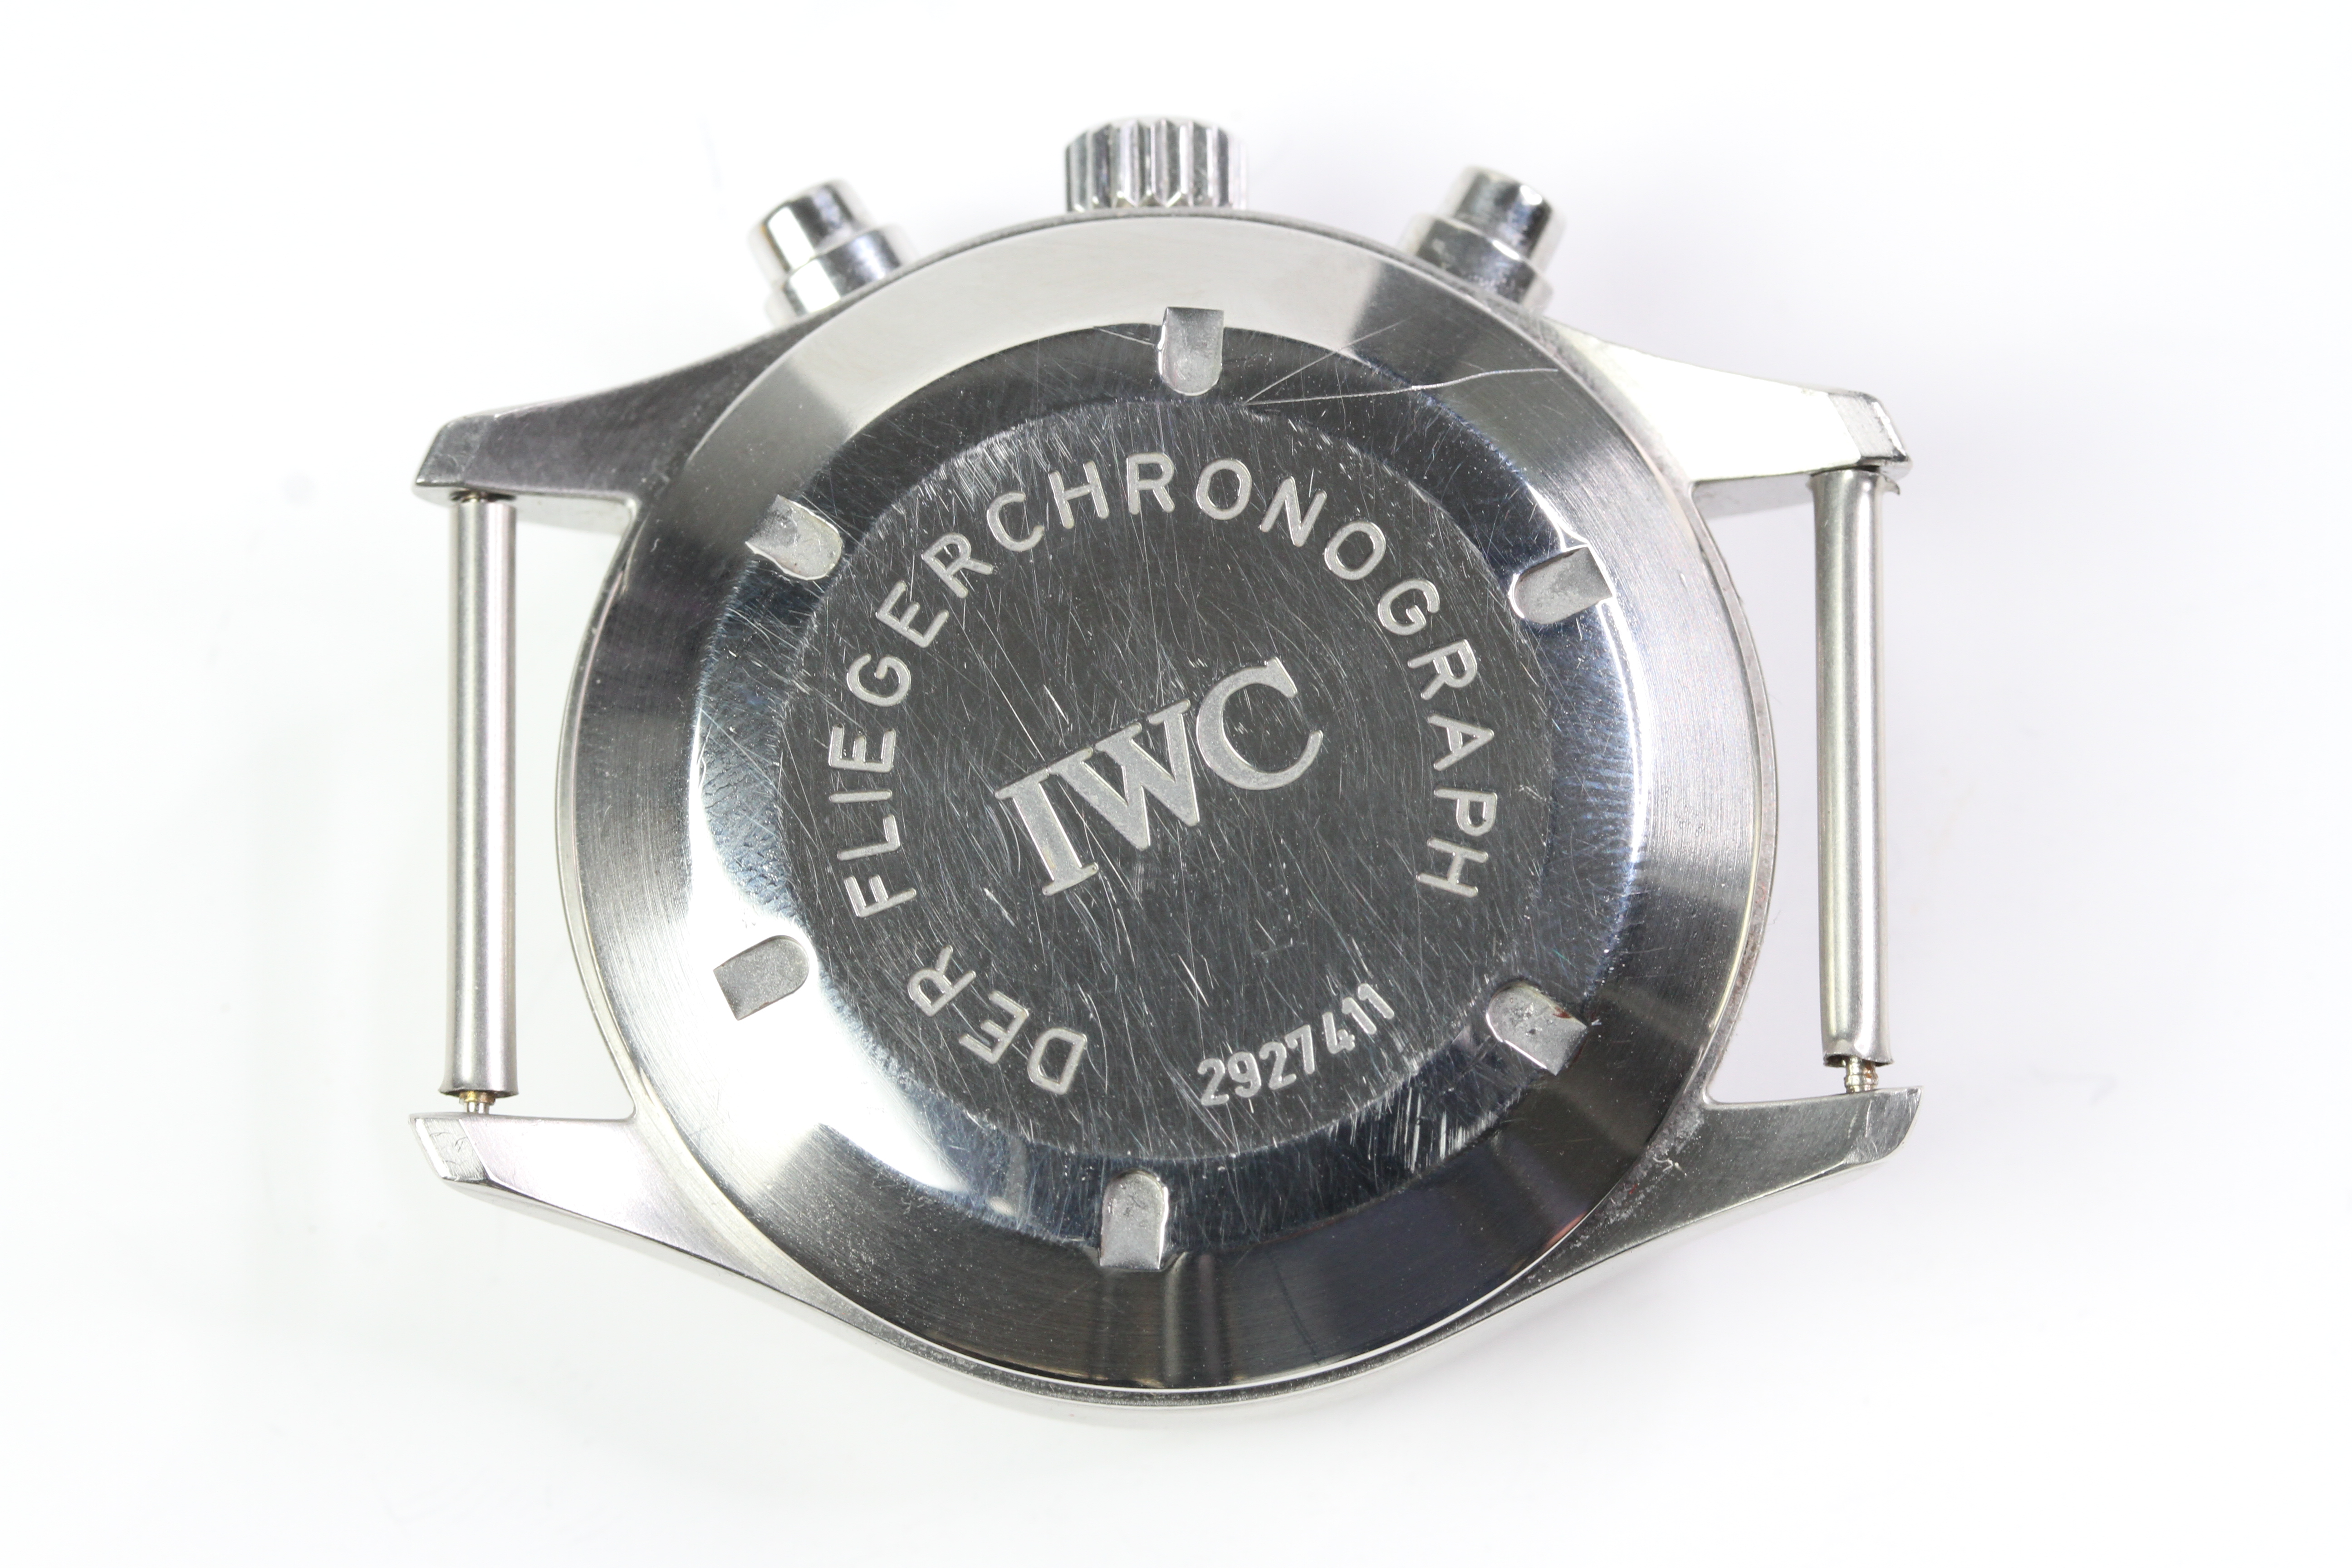 IWC PILOTS CHRONOGRAPH REFERENCE 3706 - Image 4 of 8